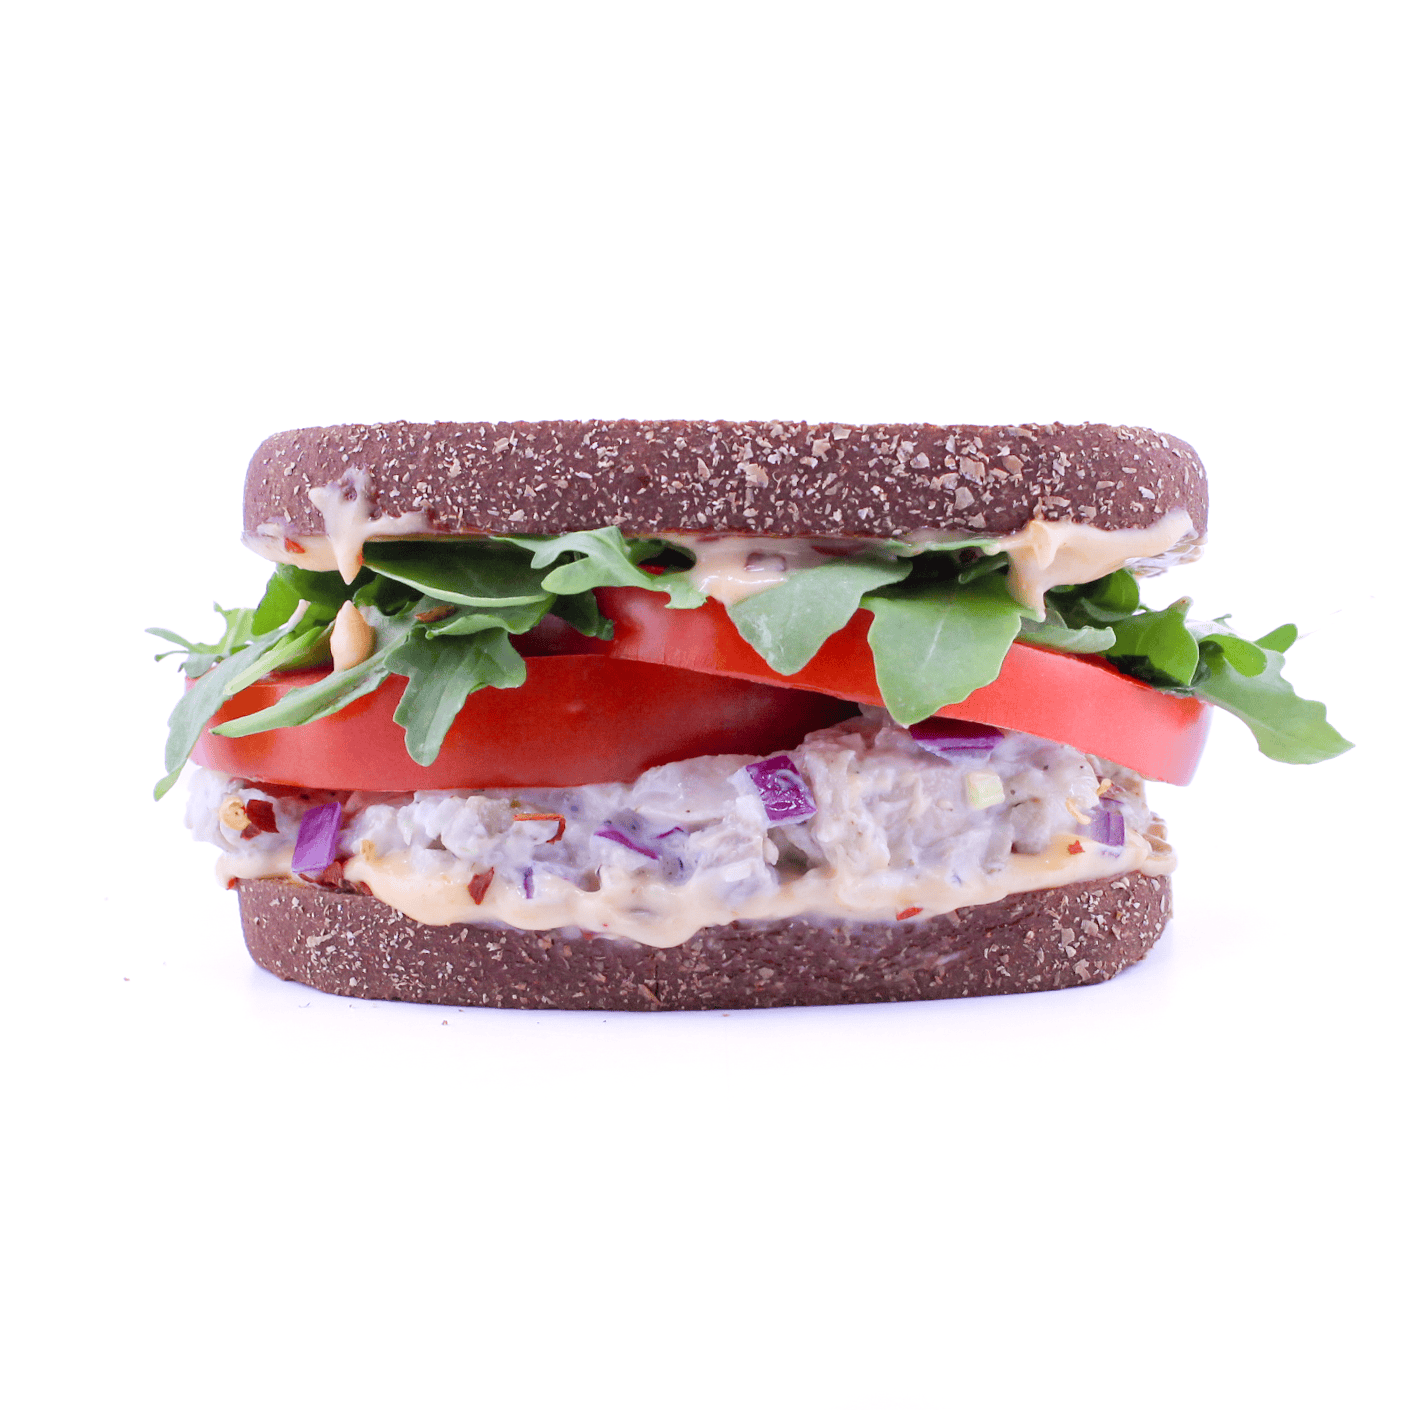 Chicken, celery, red onion, mayonnaise, arugula, tomatoes, spicy aioli on toasted honey wheat